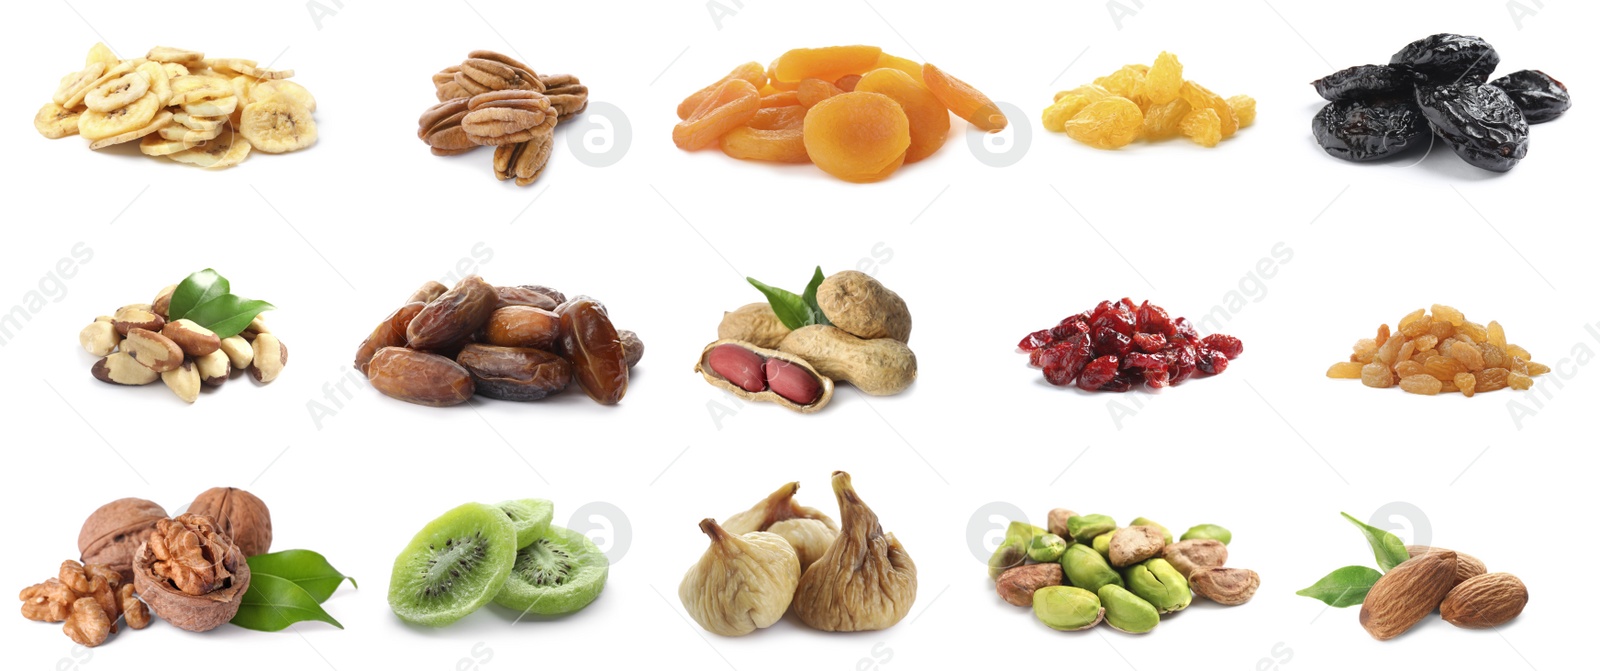 Image of Set of different dry fruits and nuts on white background. Banner design